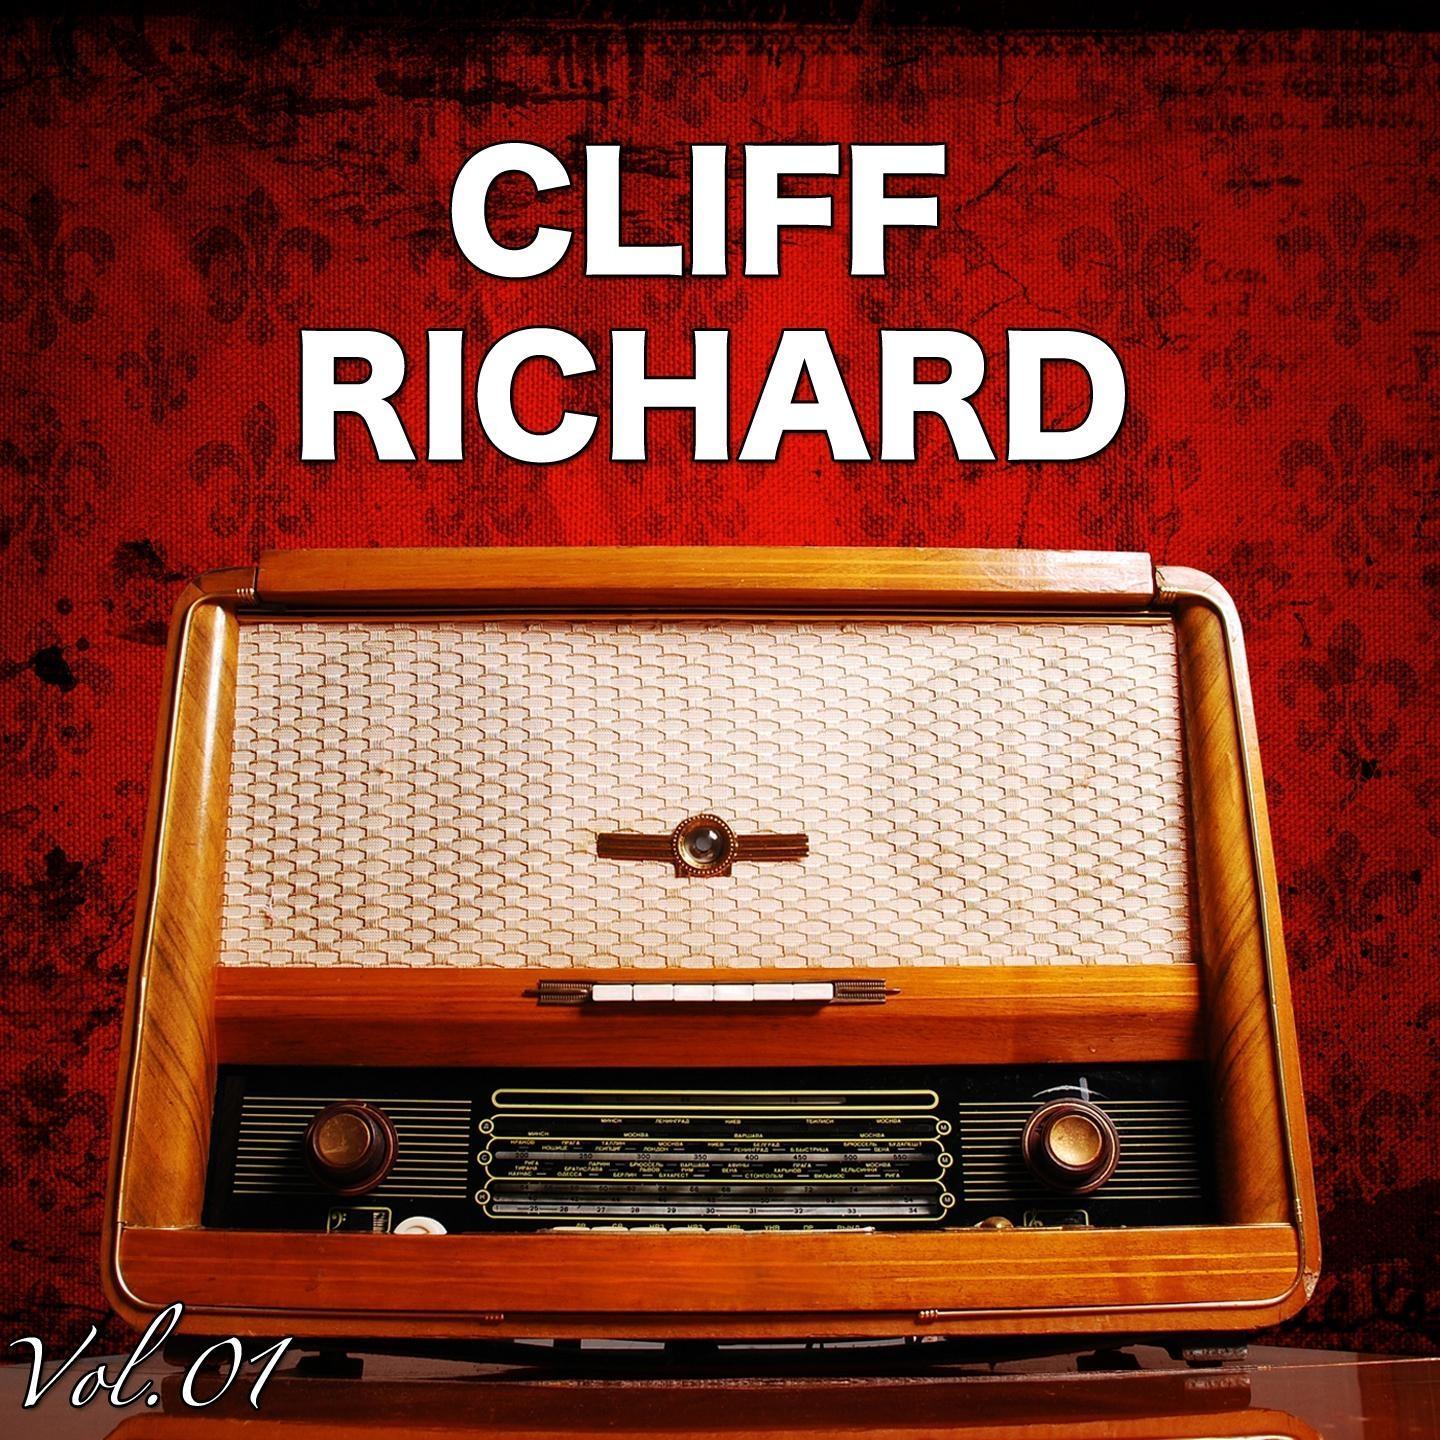 H.o.t.S Presents : The Very Best of Cliff Richard, Vol.1